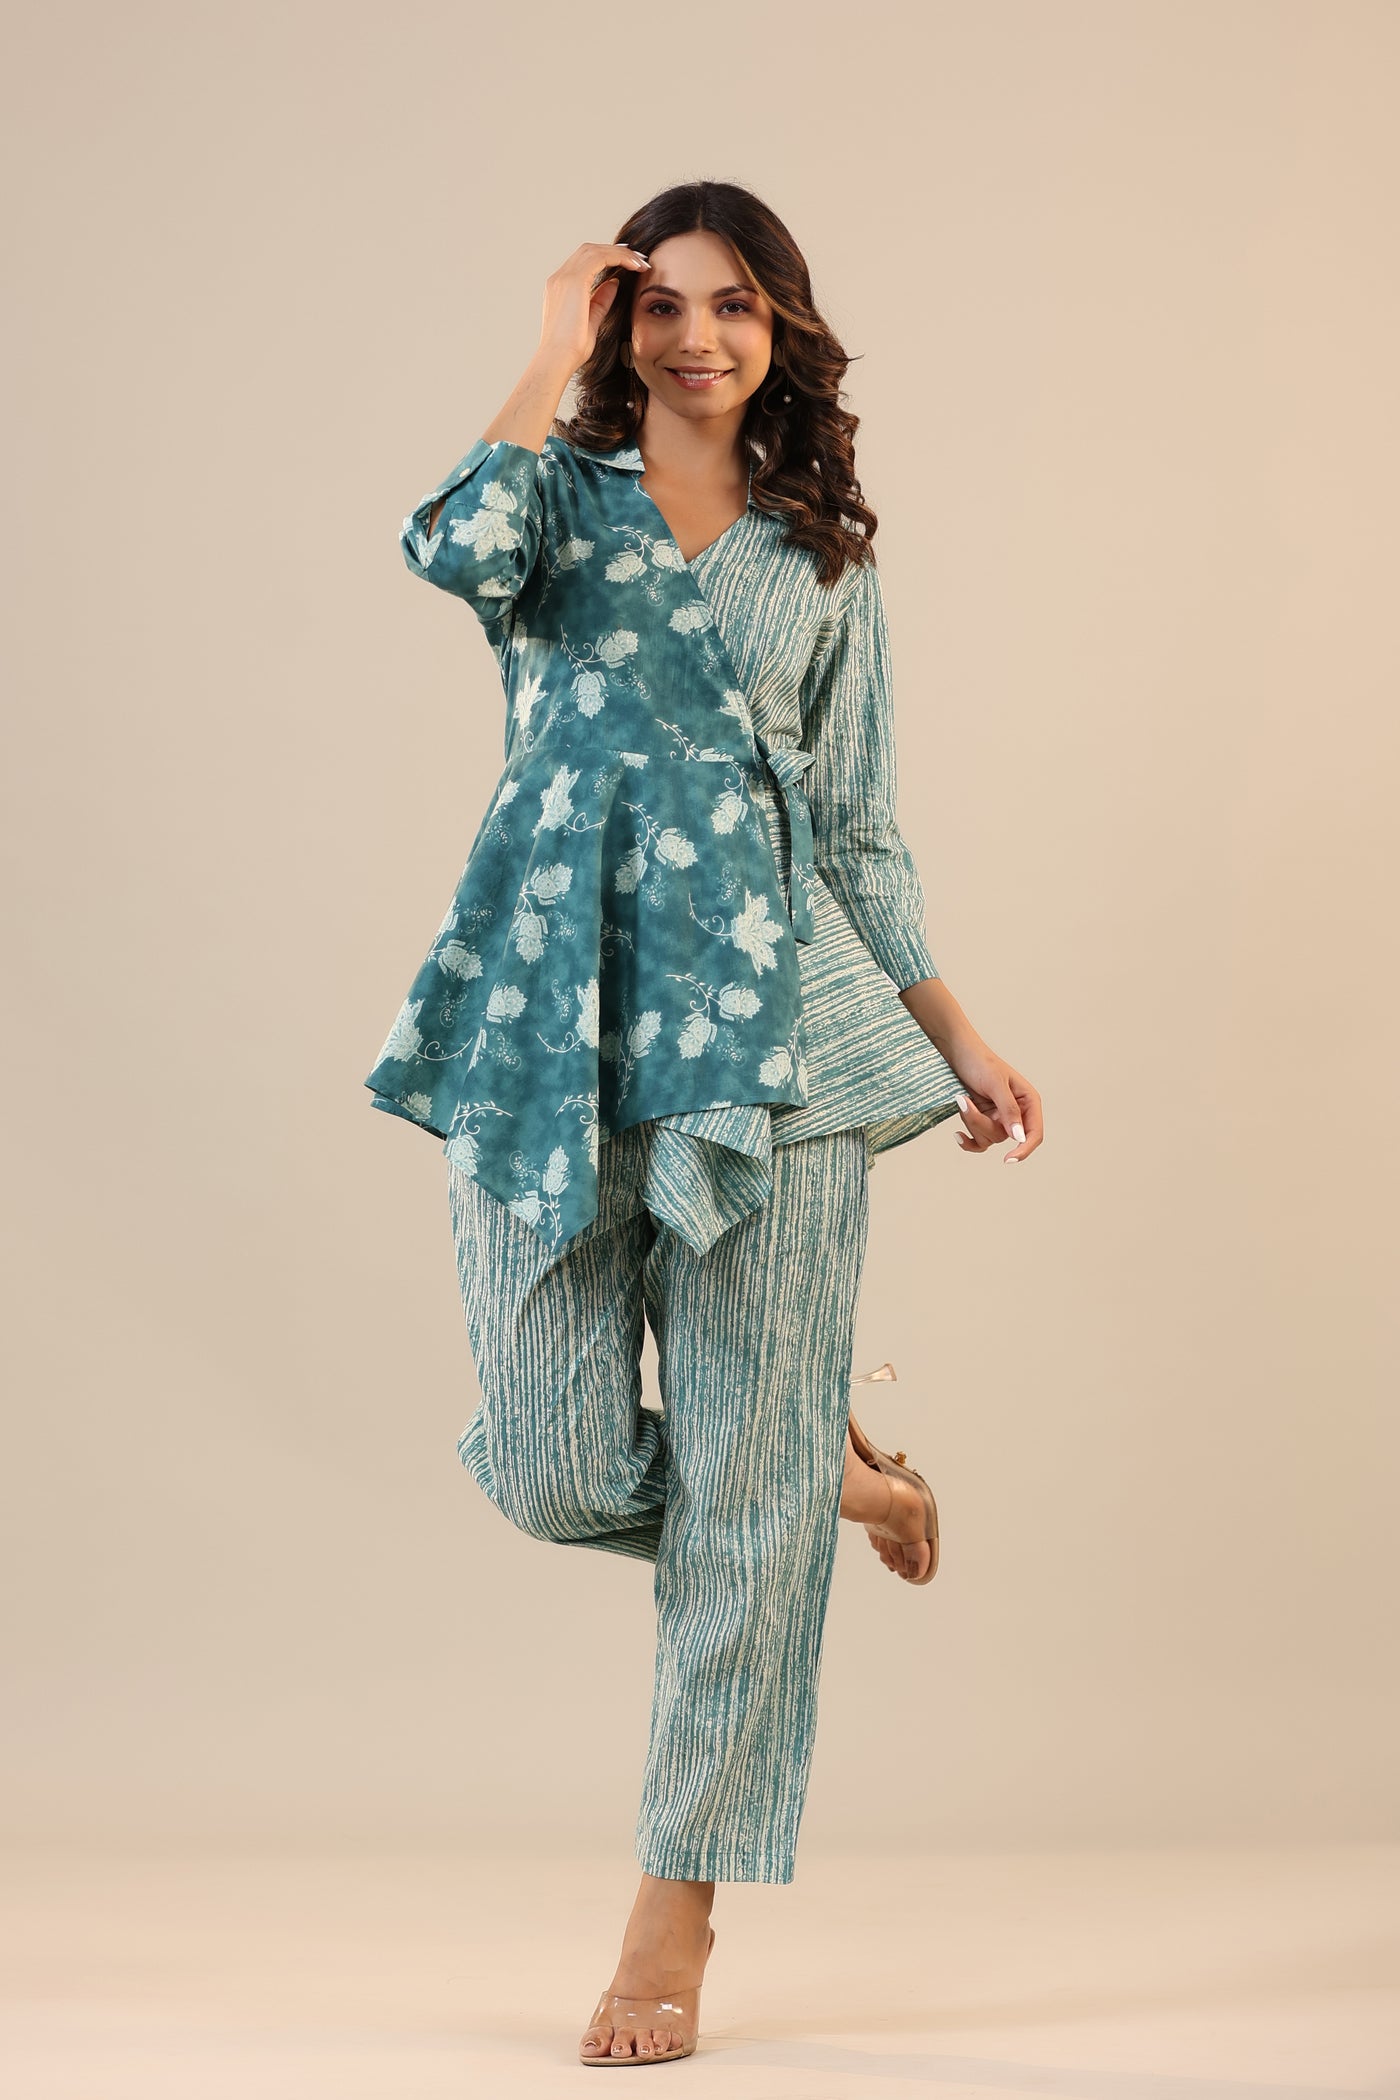 Stripes with Florals on Teal Knot Cotton Loungewear Set